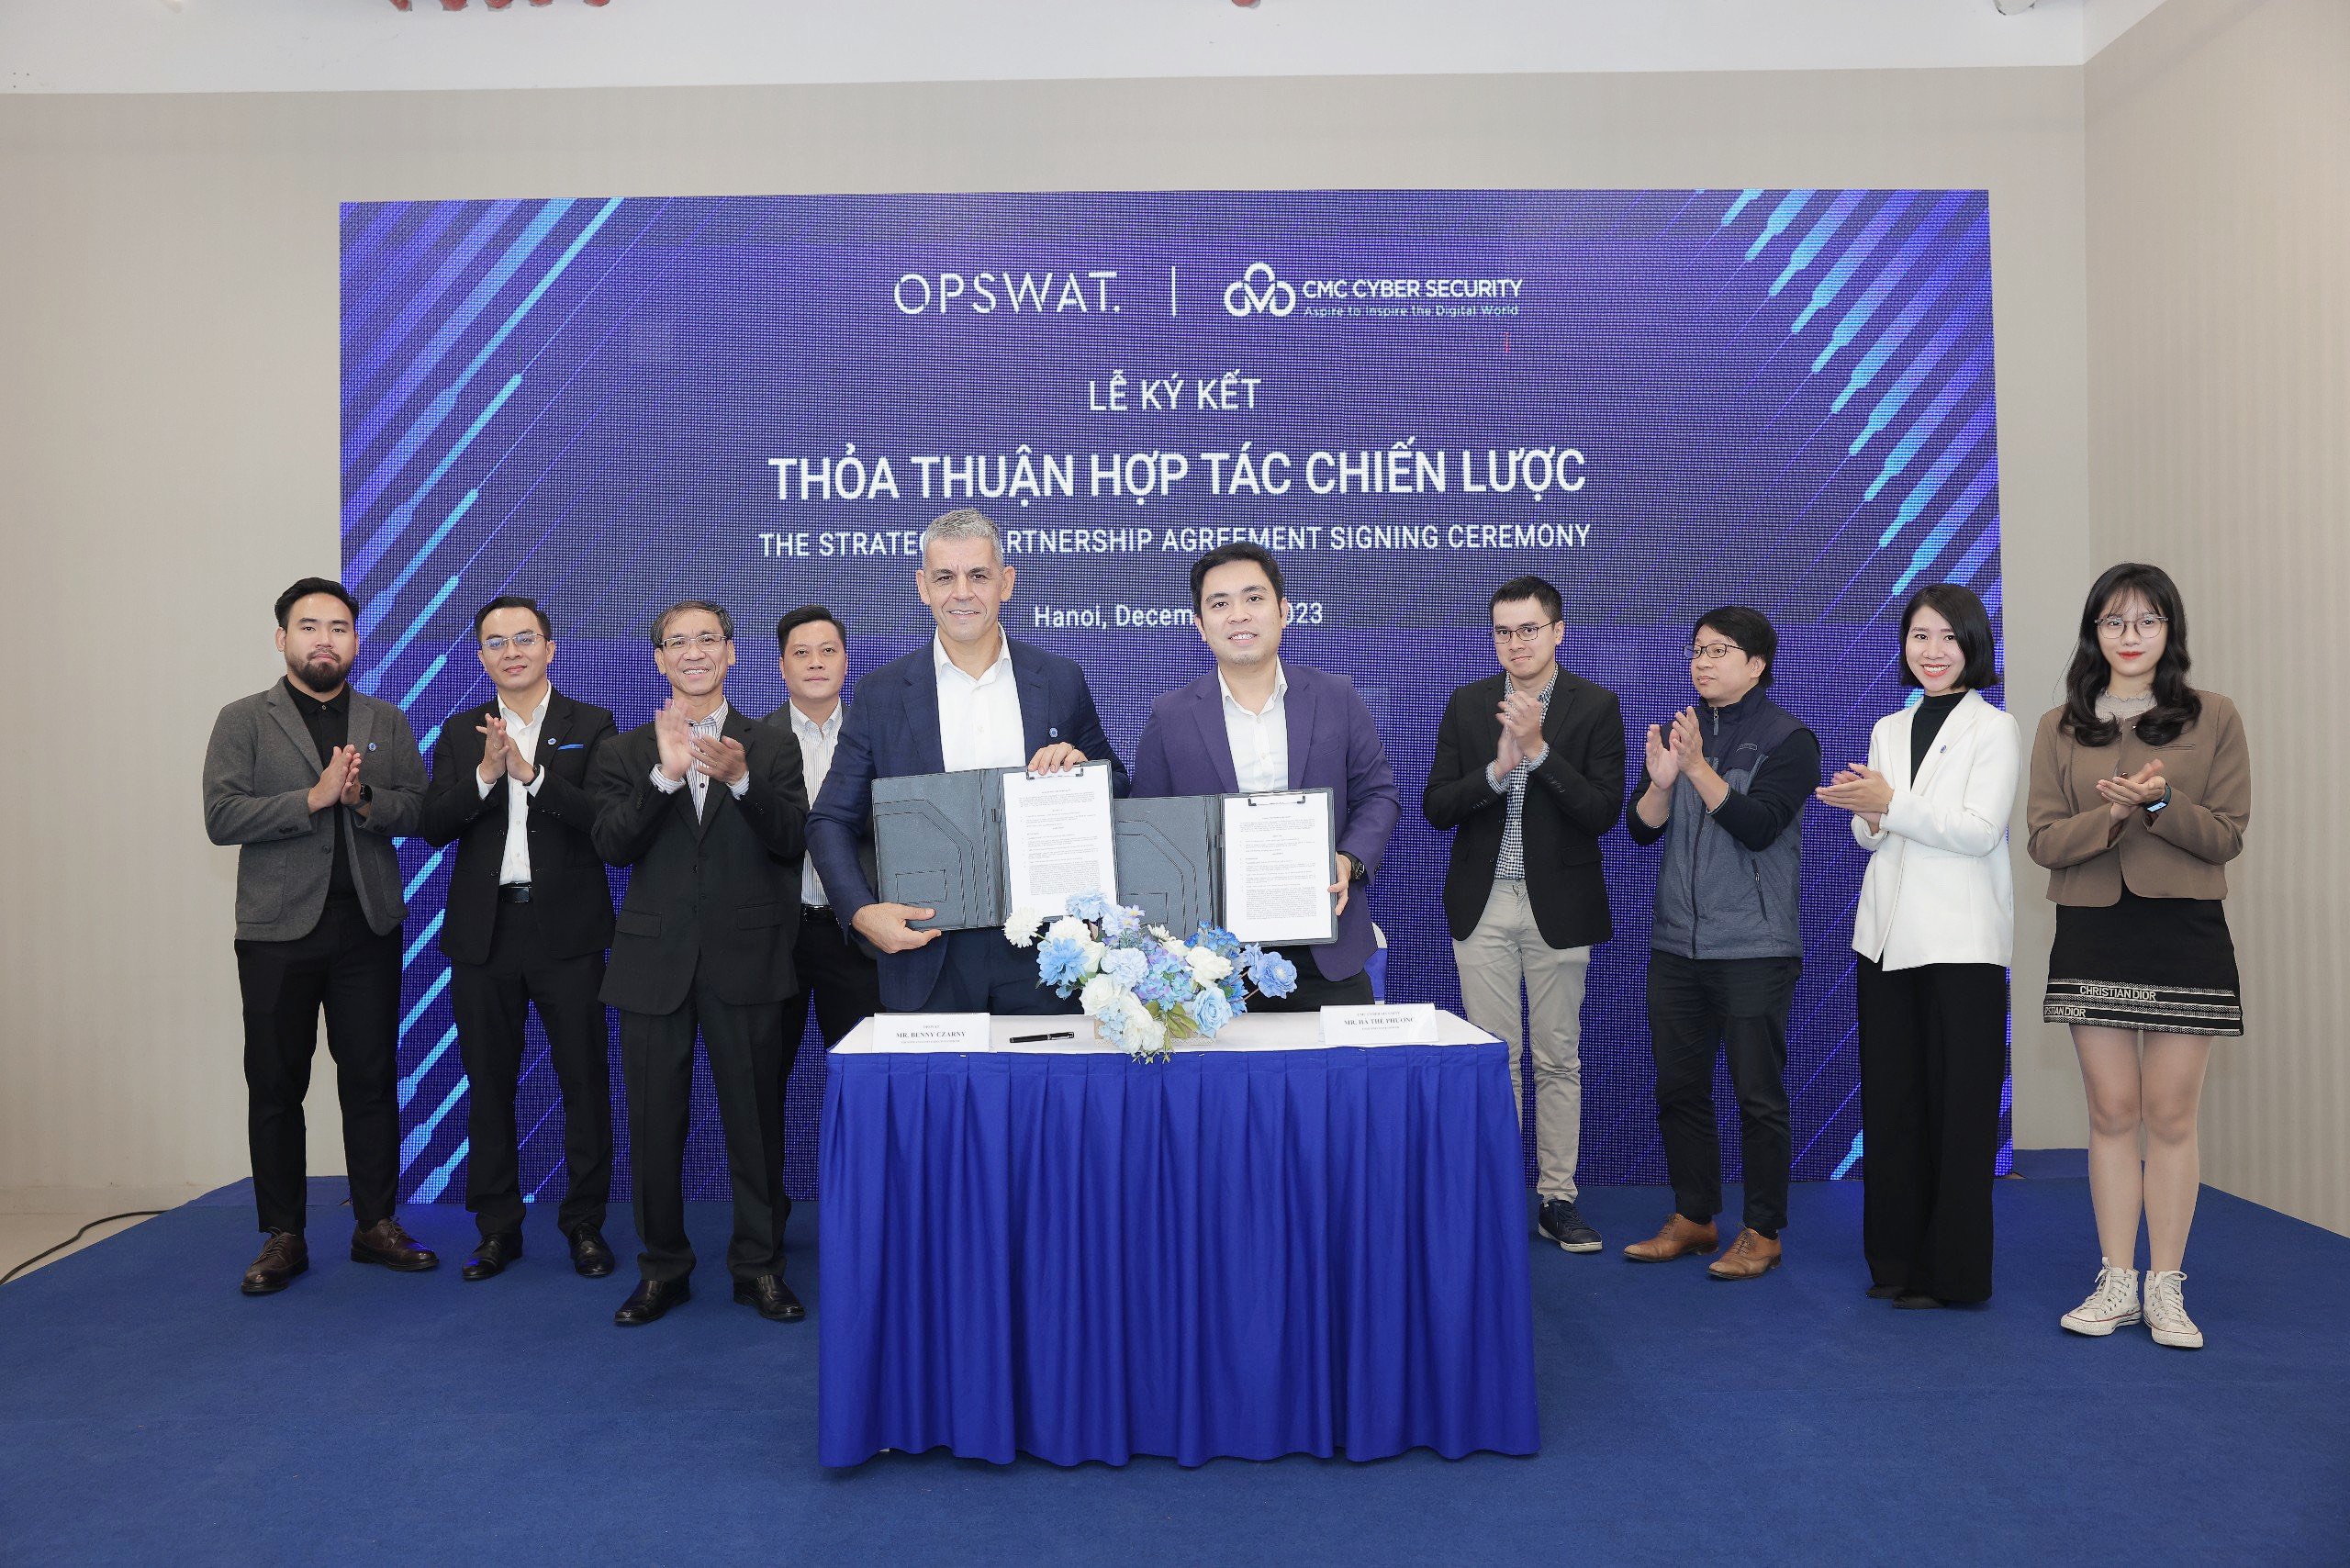 CMC Cyber Security "shakes hands" with international security partner OPSWAT